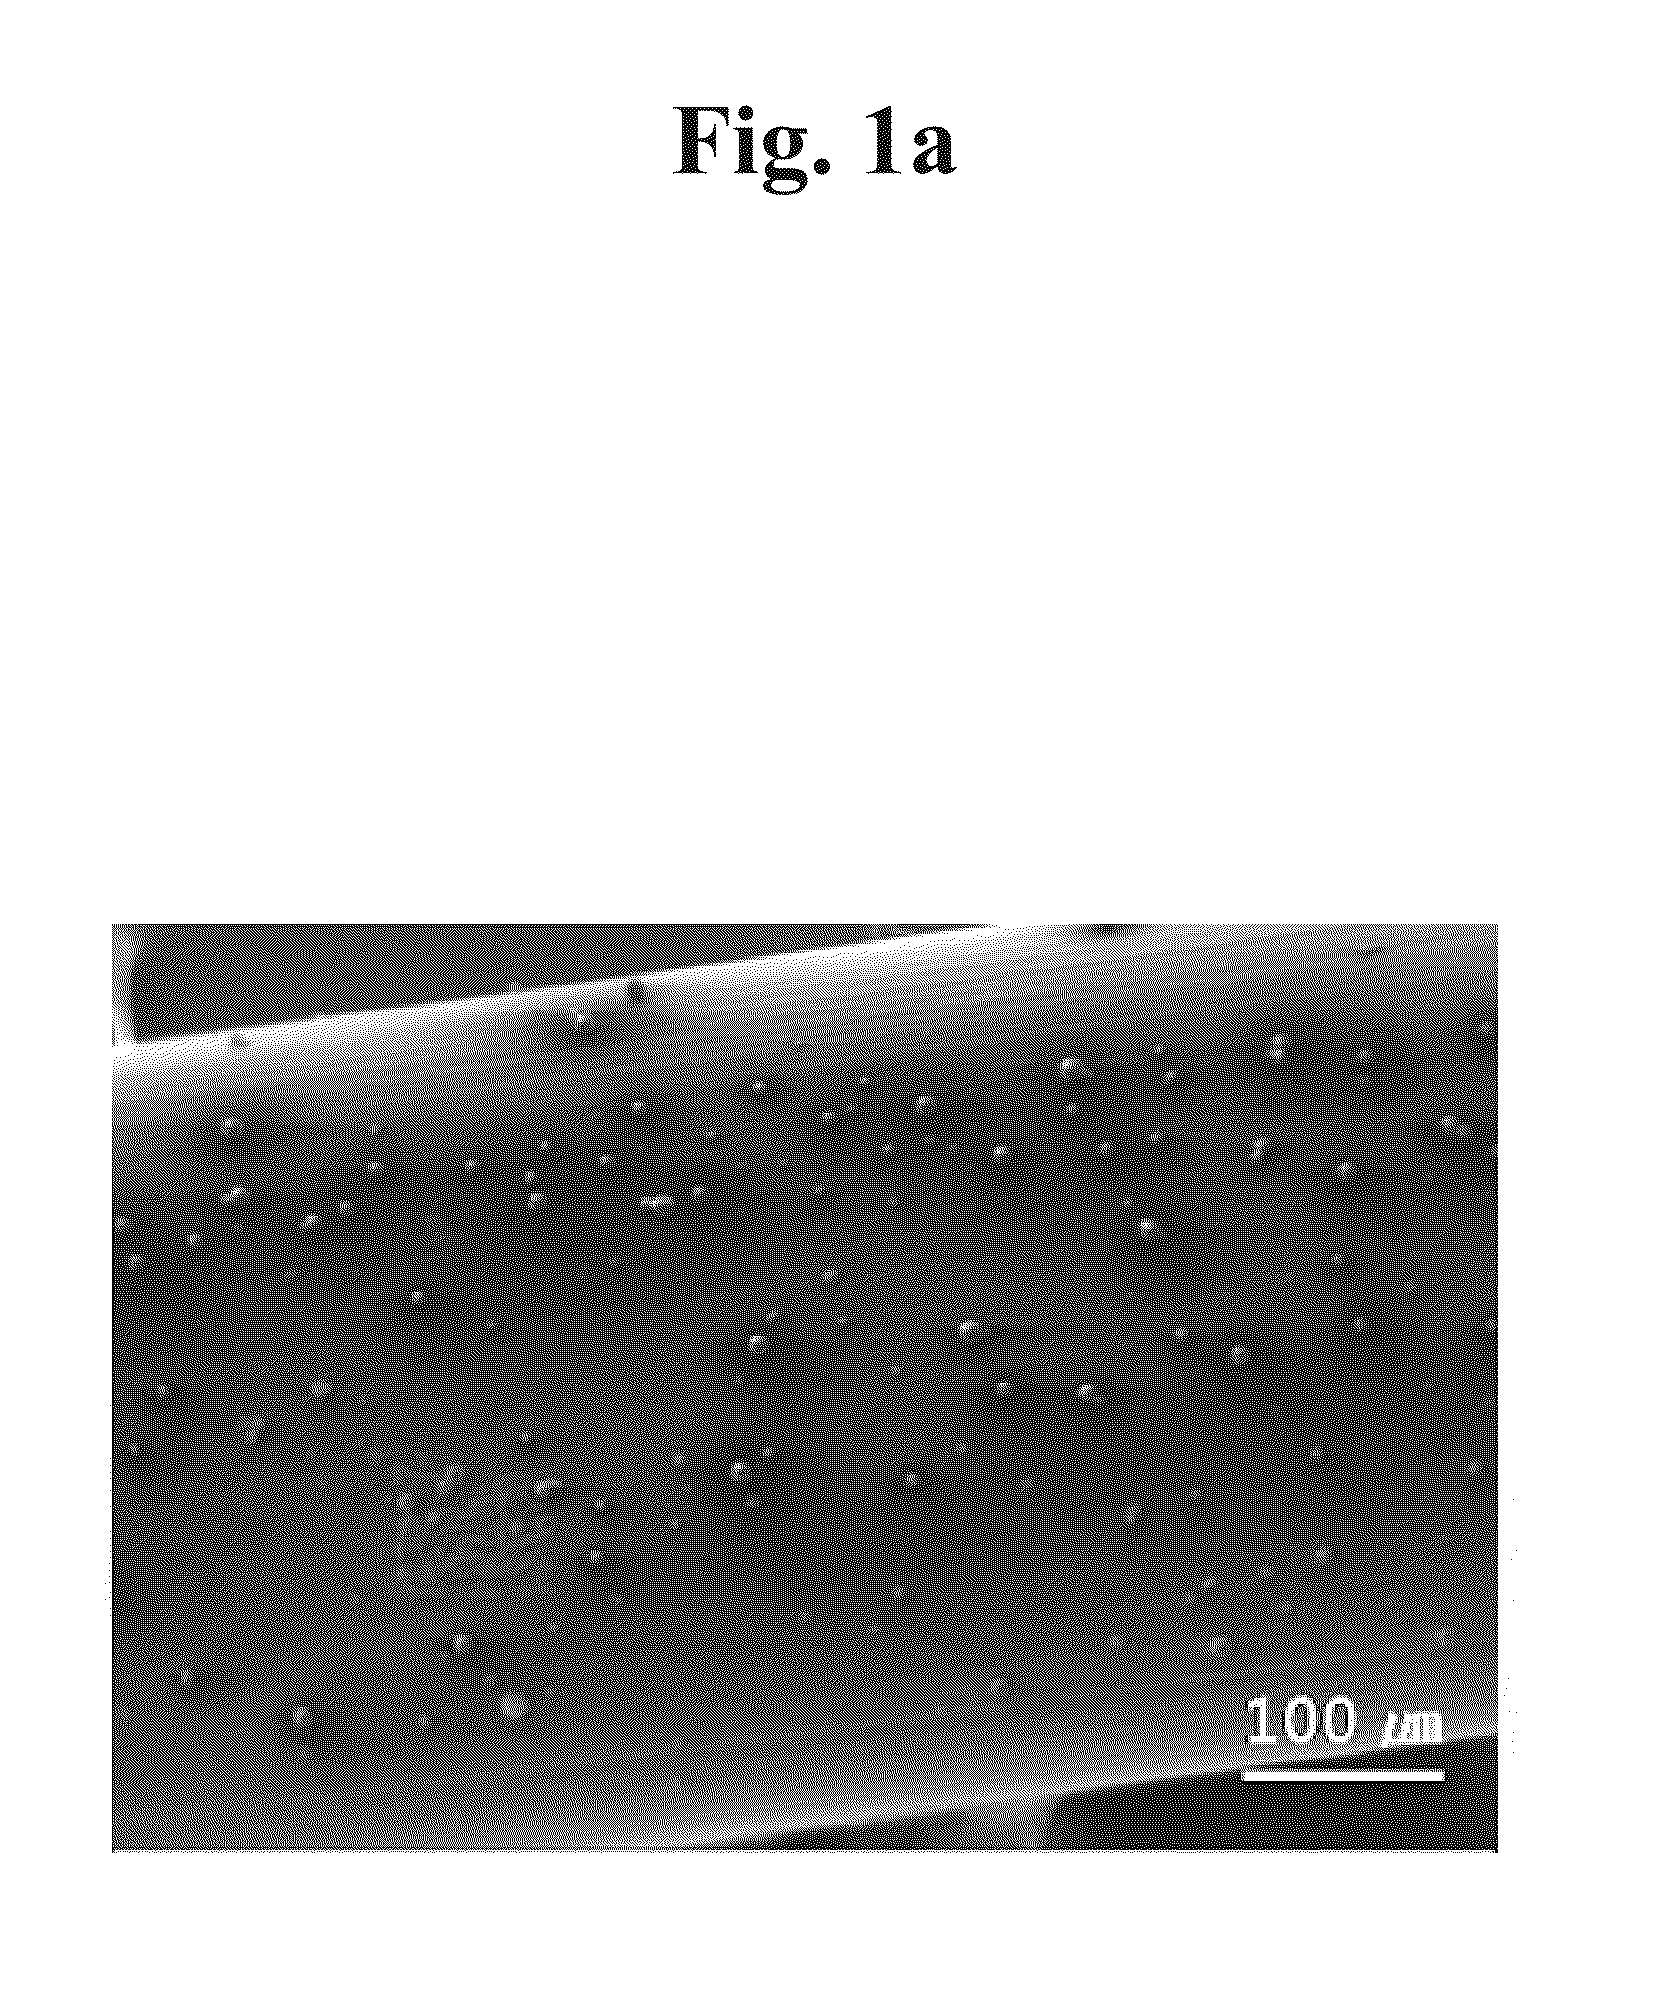 Method for preparing polymeric biomaterials having immobilized drug delivery system comprising bioactive molecules loaded particle carrier